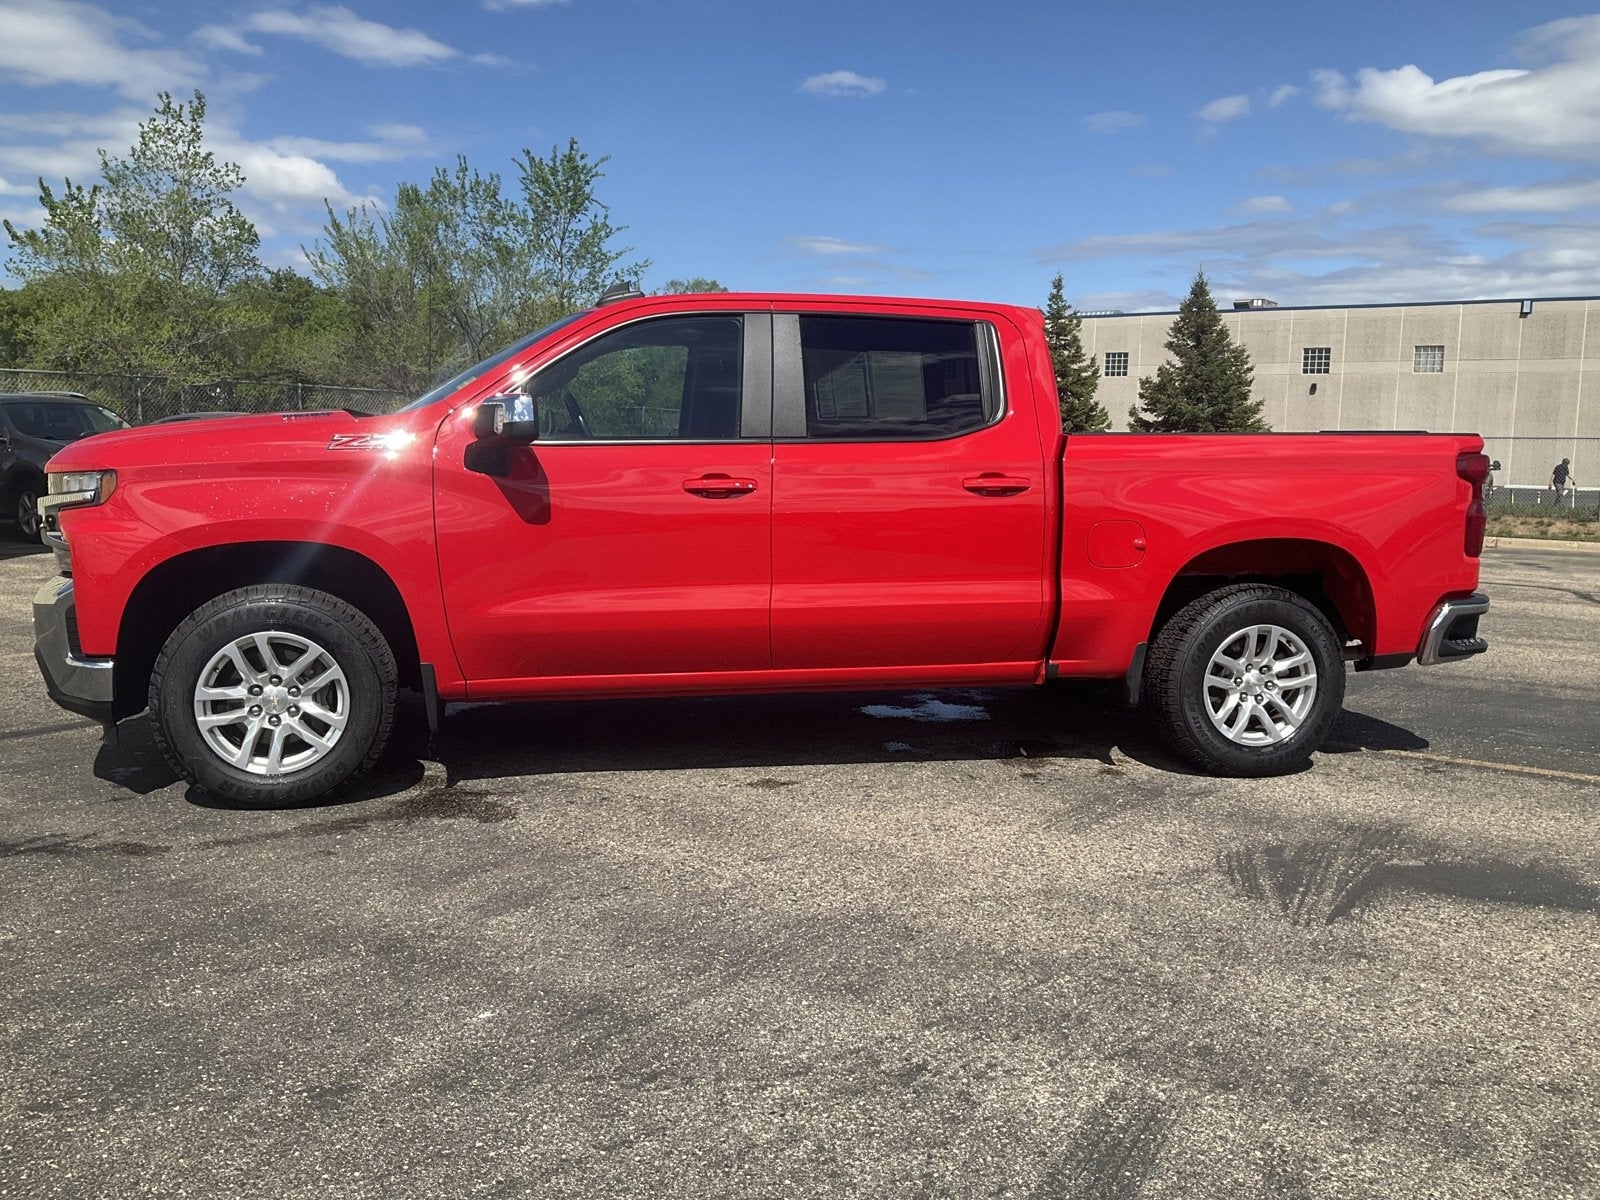 Used 2021 Chevrolet Silverado 1500 LT with VIN 3GCUYDET4MG201762 for sale in Fridley, Minnesota